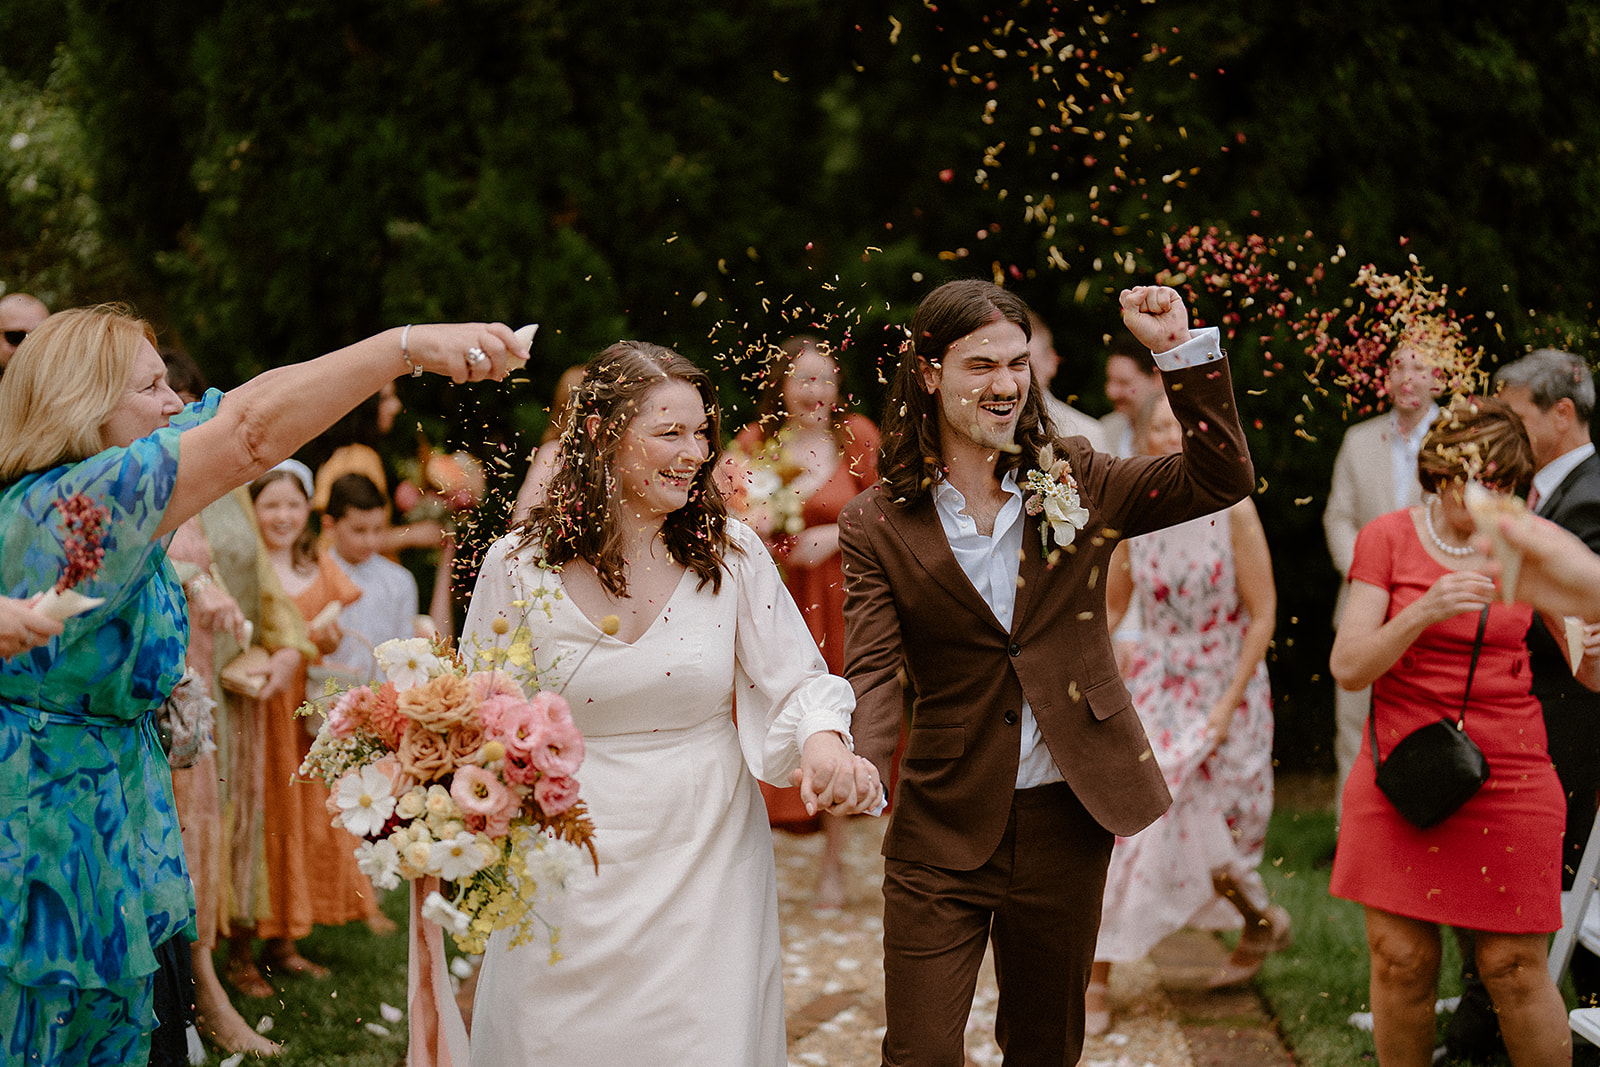 An epic couple walking down the aisle, showered in confetti at their Fitzroy Inn wedding.